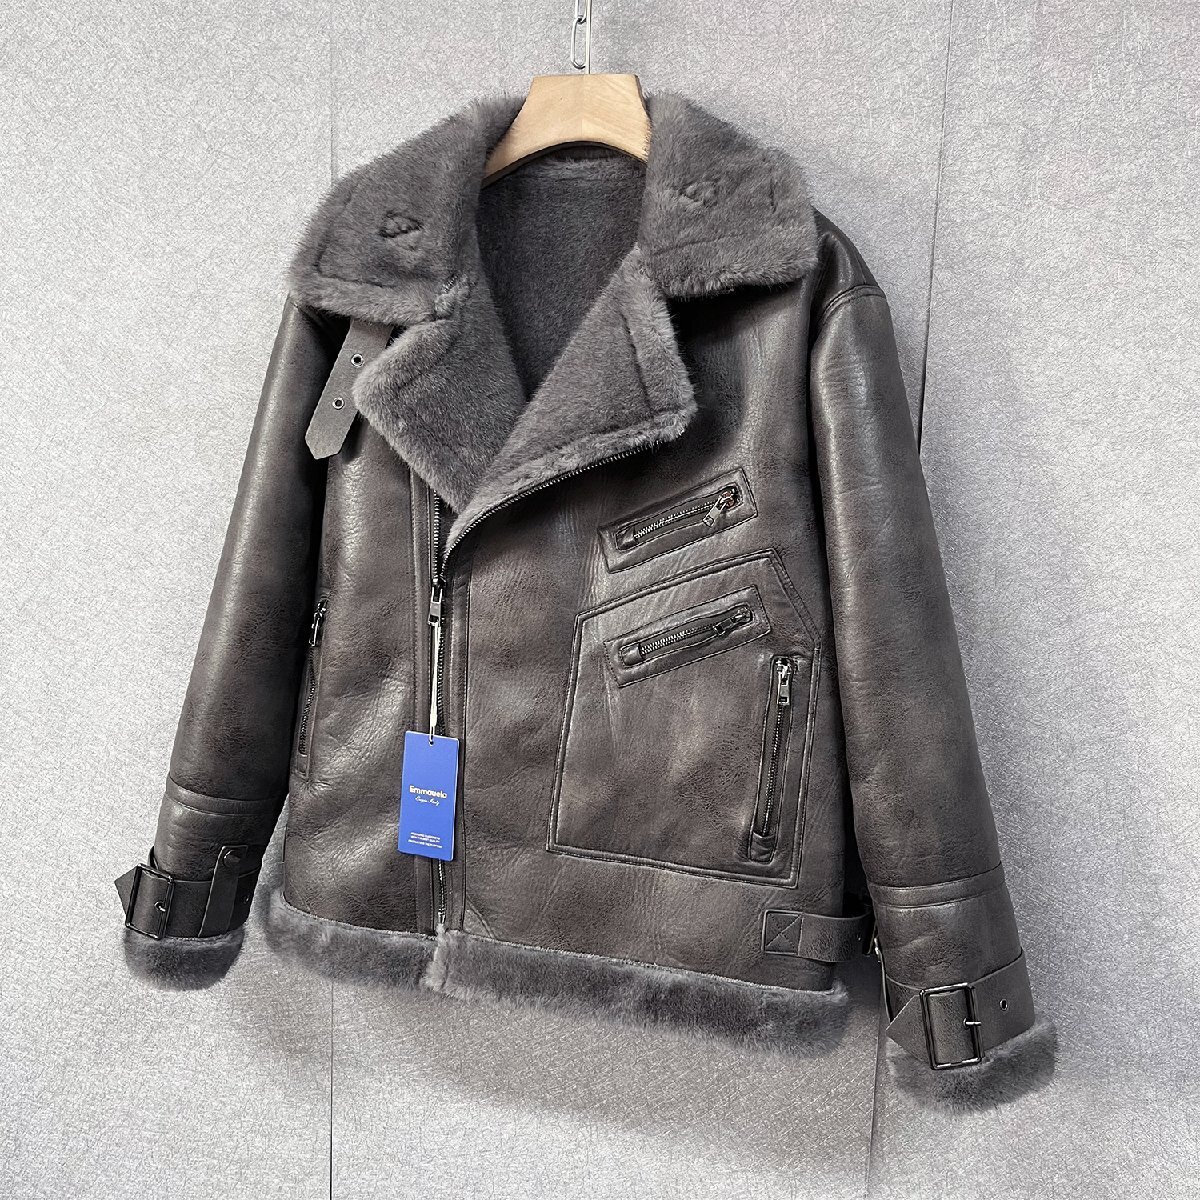  gorgeous * leather jacket regular price 8 ten thousand *Emmauela* Italy * milano departure *boma- high class sheepskin original leather -ply thickness protection against cold Rider's bike autumn winter L/48 size 